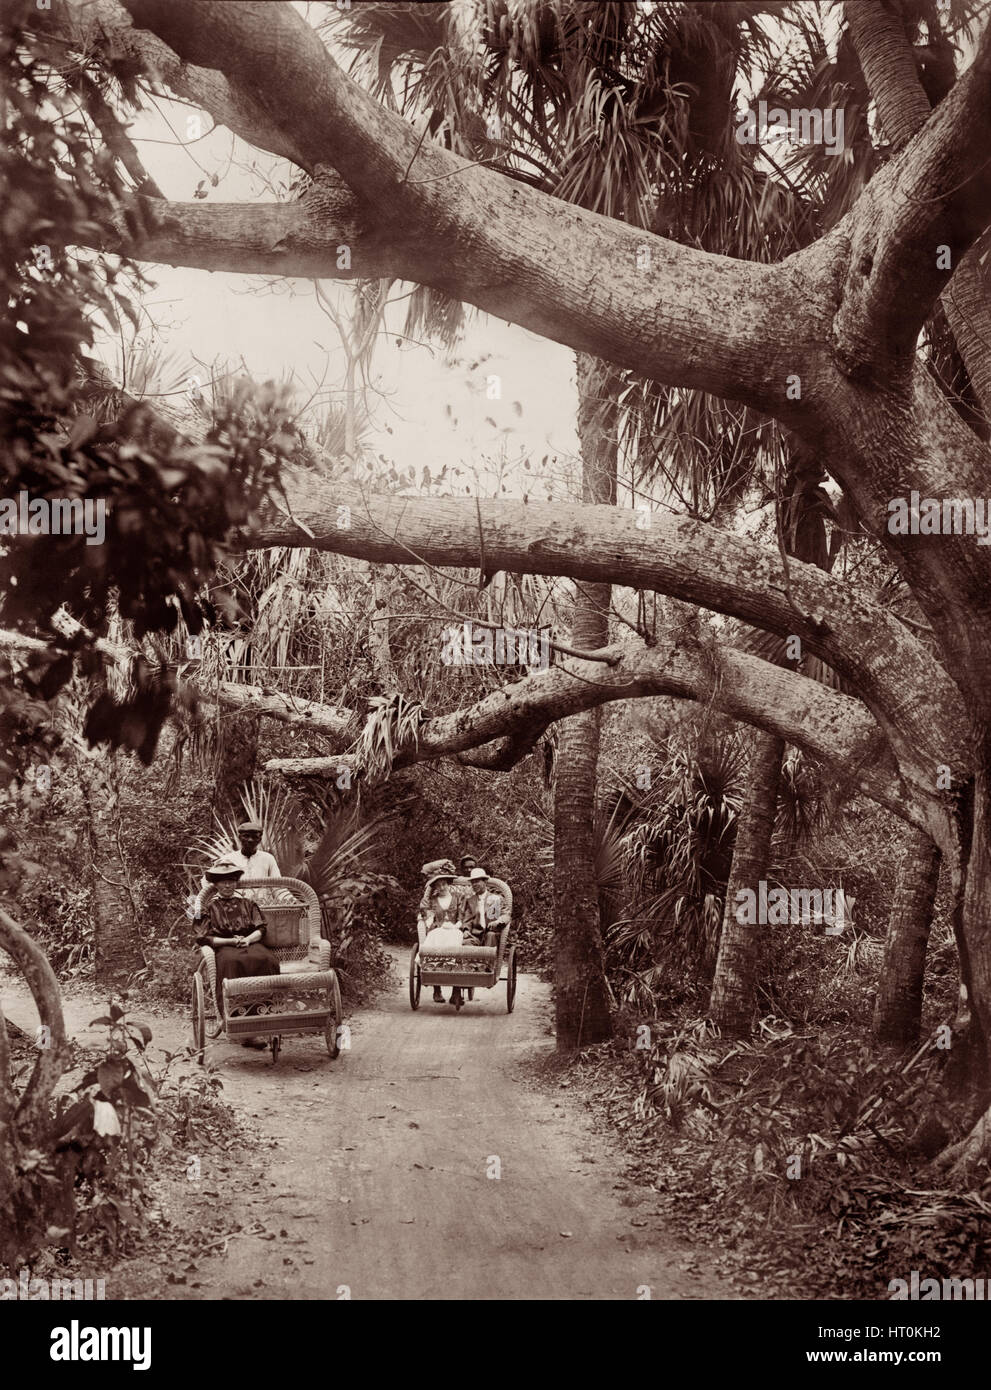 Palm Beach chariots, wicker-chaired rickshaws later referred to as afromobiles, on wooded trails in Palm Beach, Florida, c1909. Stock Photo